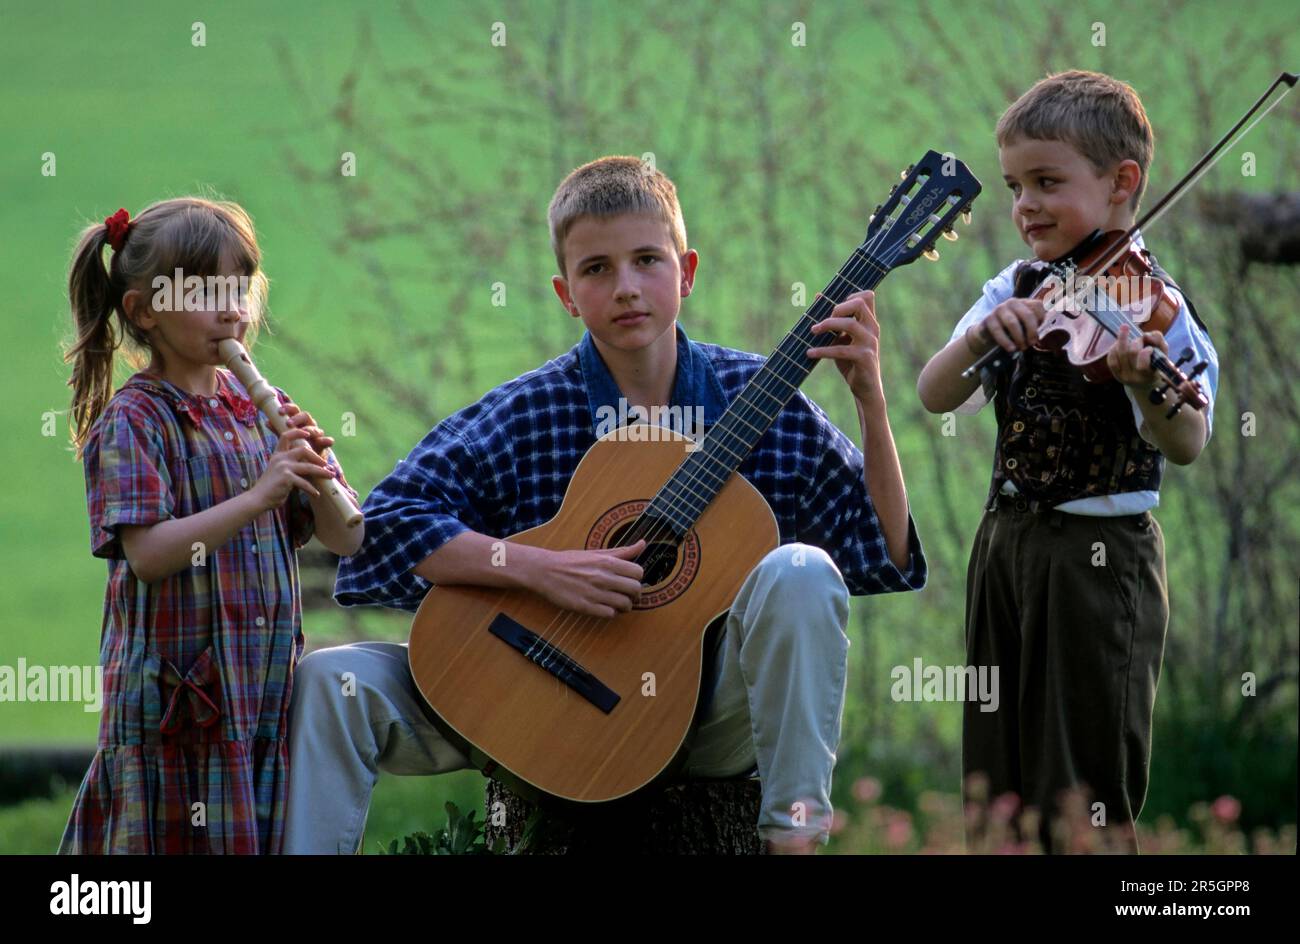 Children play the flute, guitar and violin Stock Photo